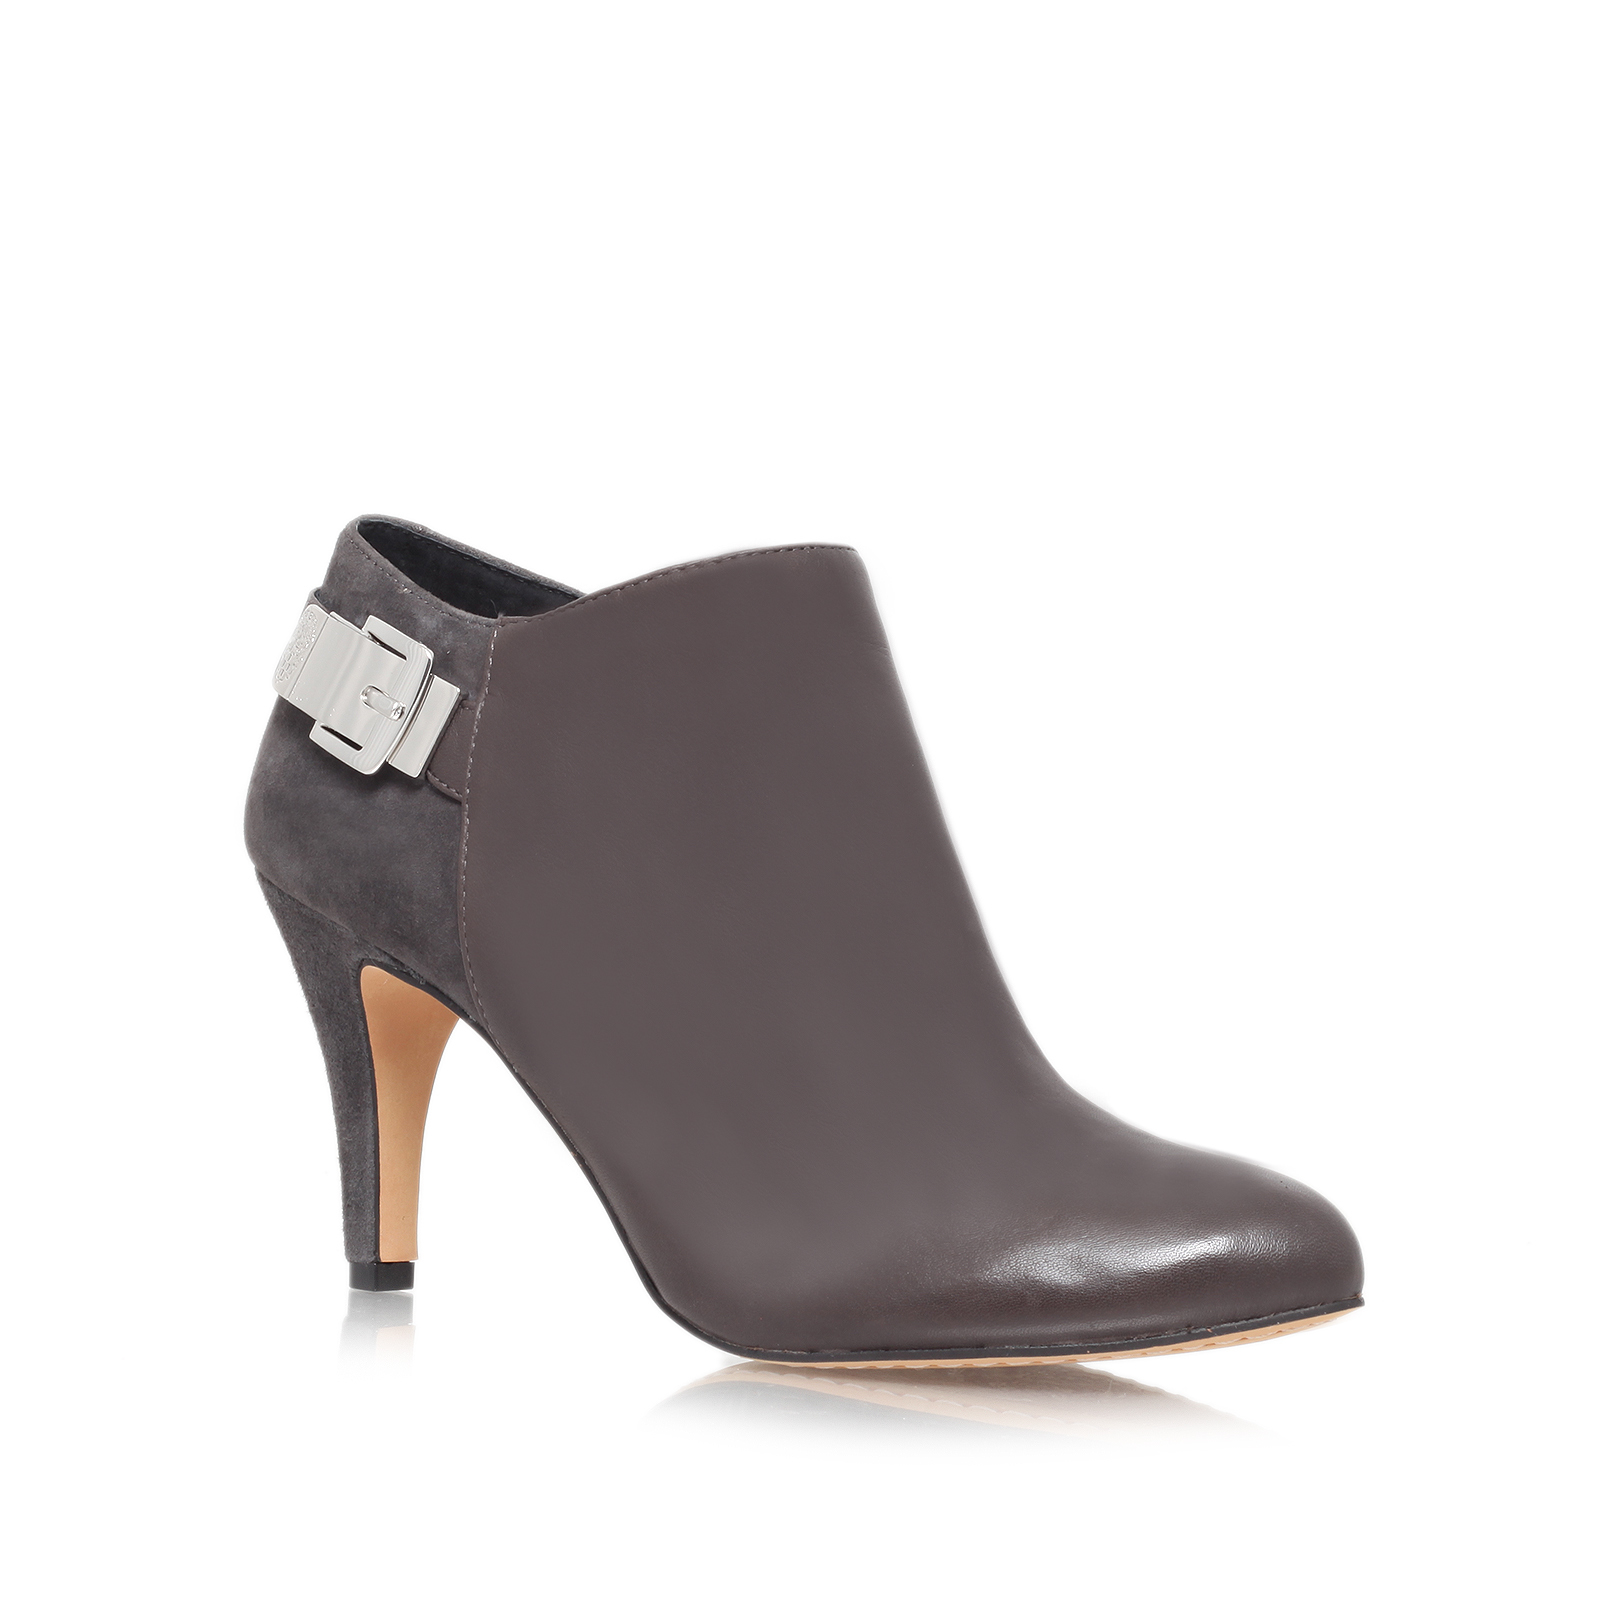 Vince Camuto | VELINO Grey High Heel Shoe Boots by VINCE CAMUTO